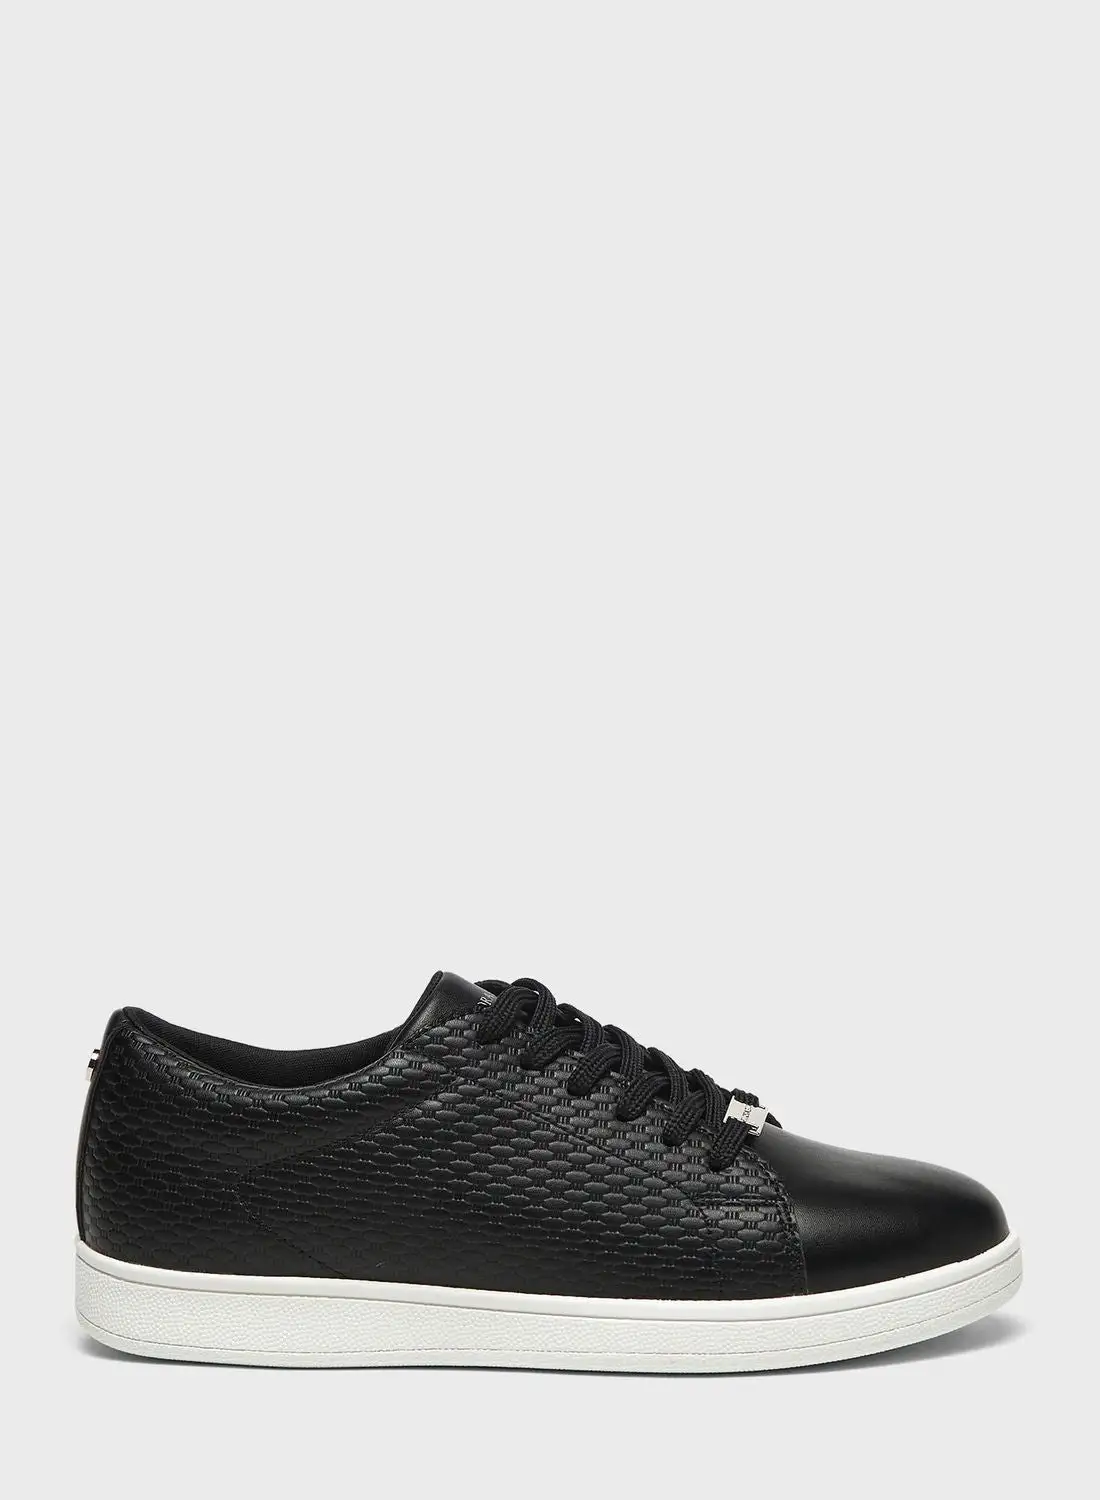 shoexpress Lace Up Low Top Sneakers